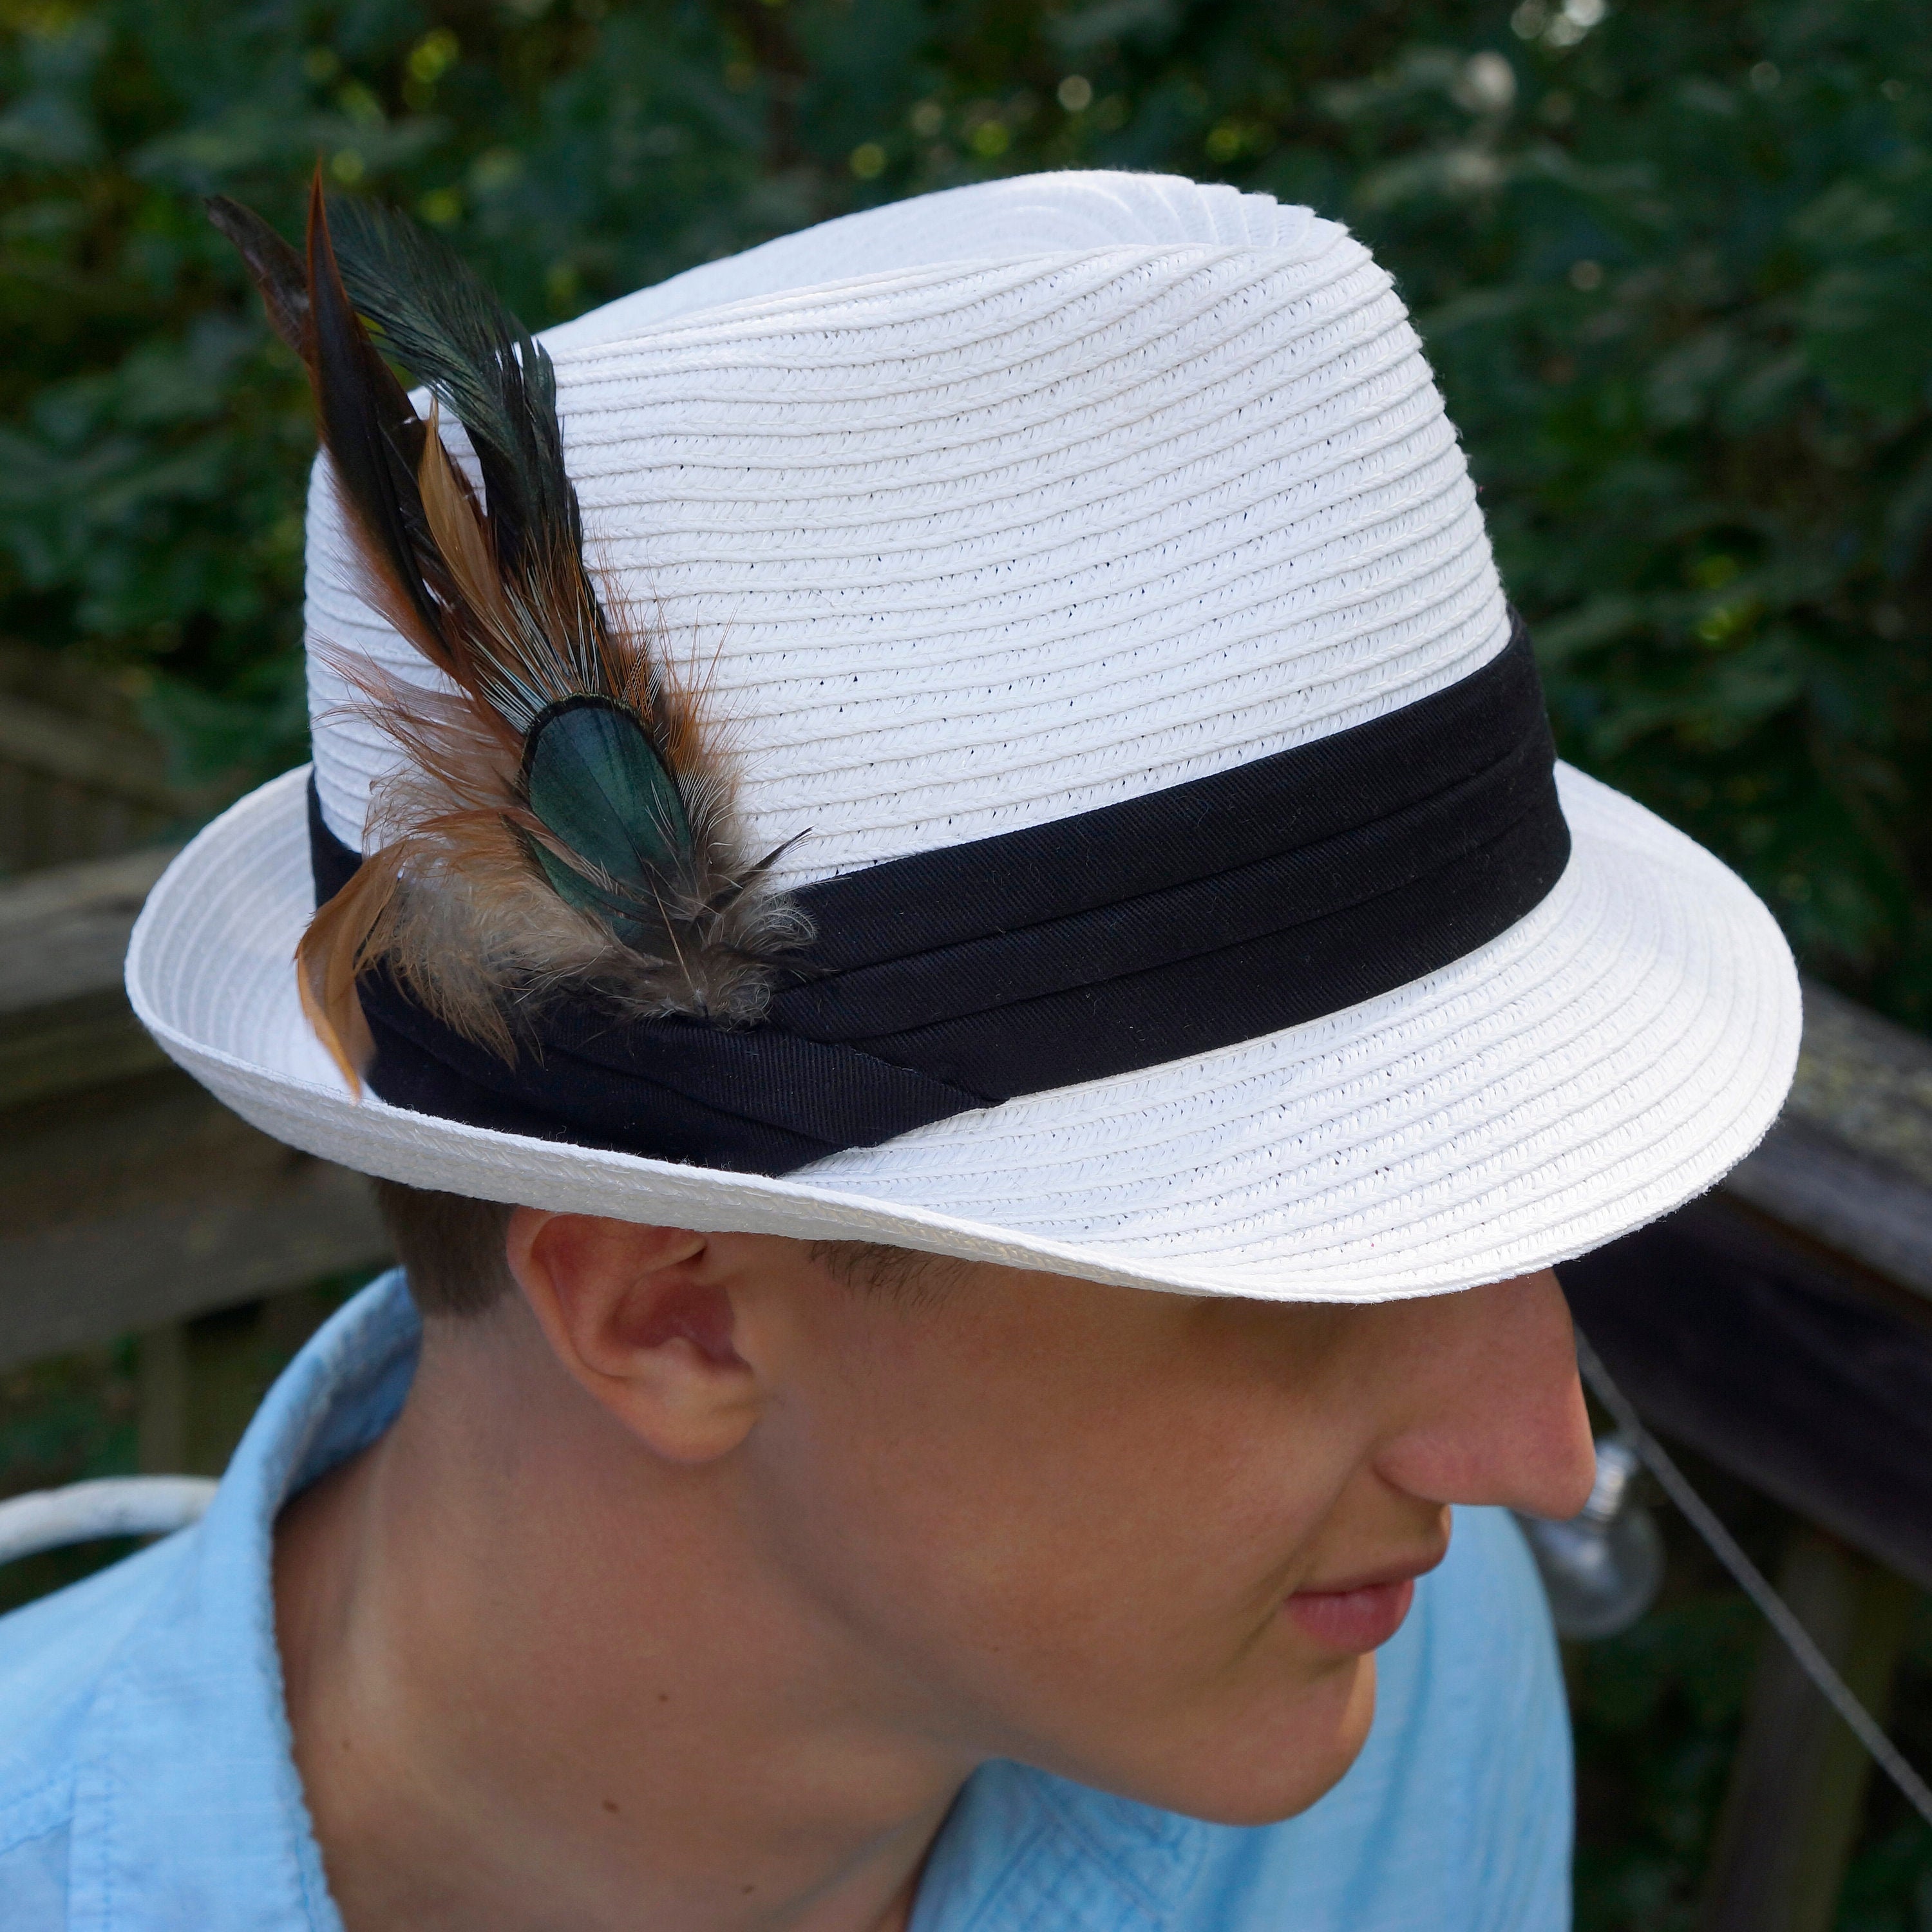 12 Assorted Craft Feathers for Cowboy Hats - DIY Guam